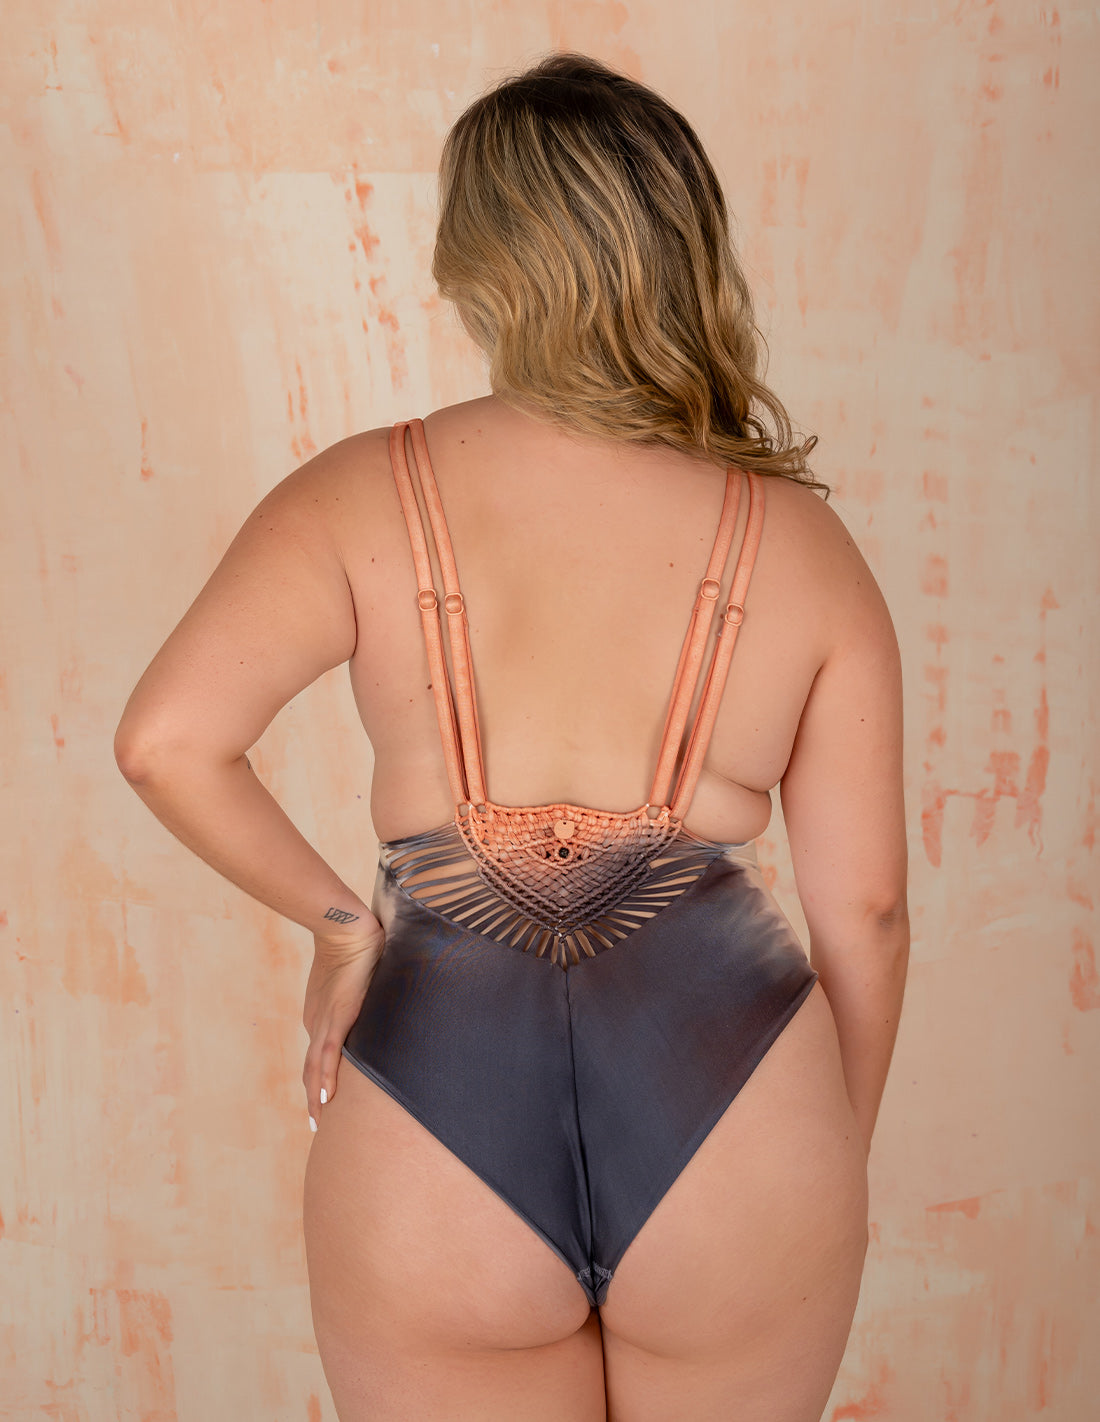 Ocus One-Piece Salmon + Black. Hand-Dyed One-Piece Swimsuit With Hand Woven Macramé In Salmon + Black. Entreaguas